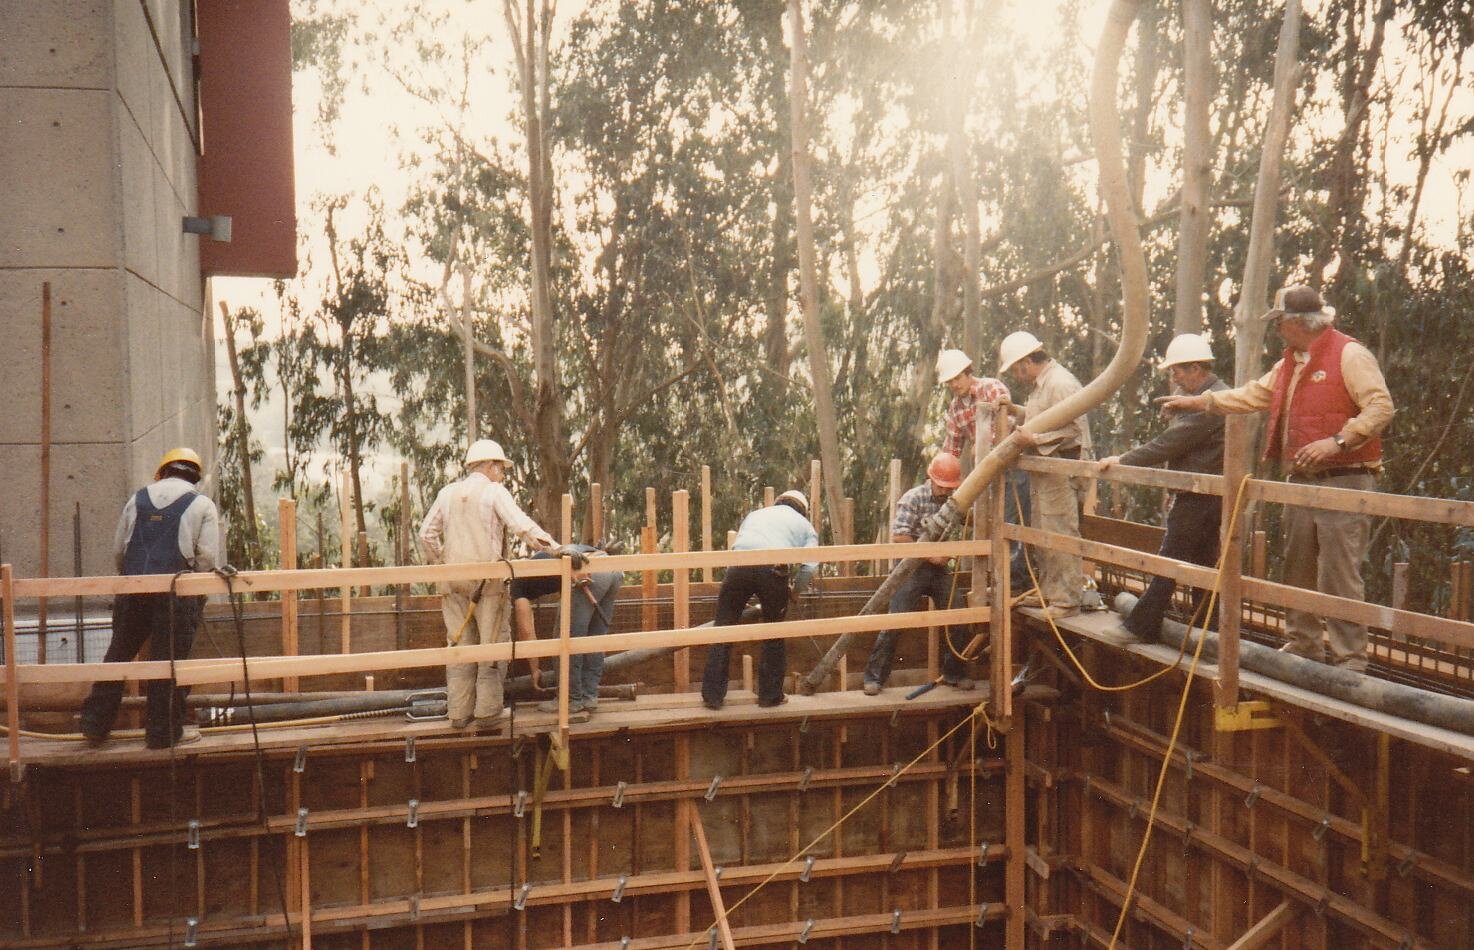 another view of workers building wood base